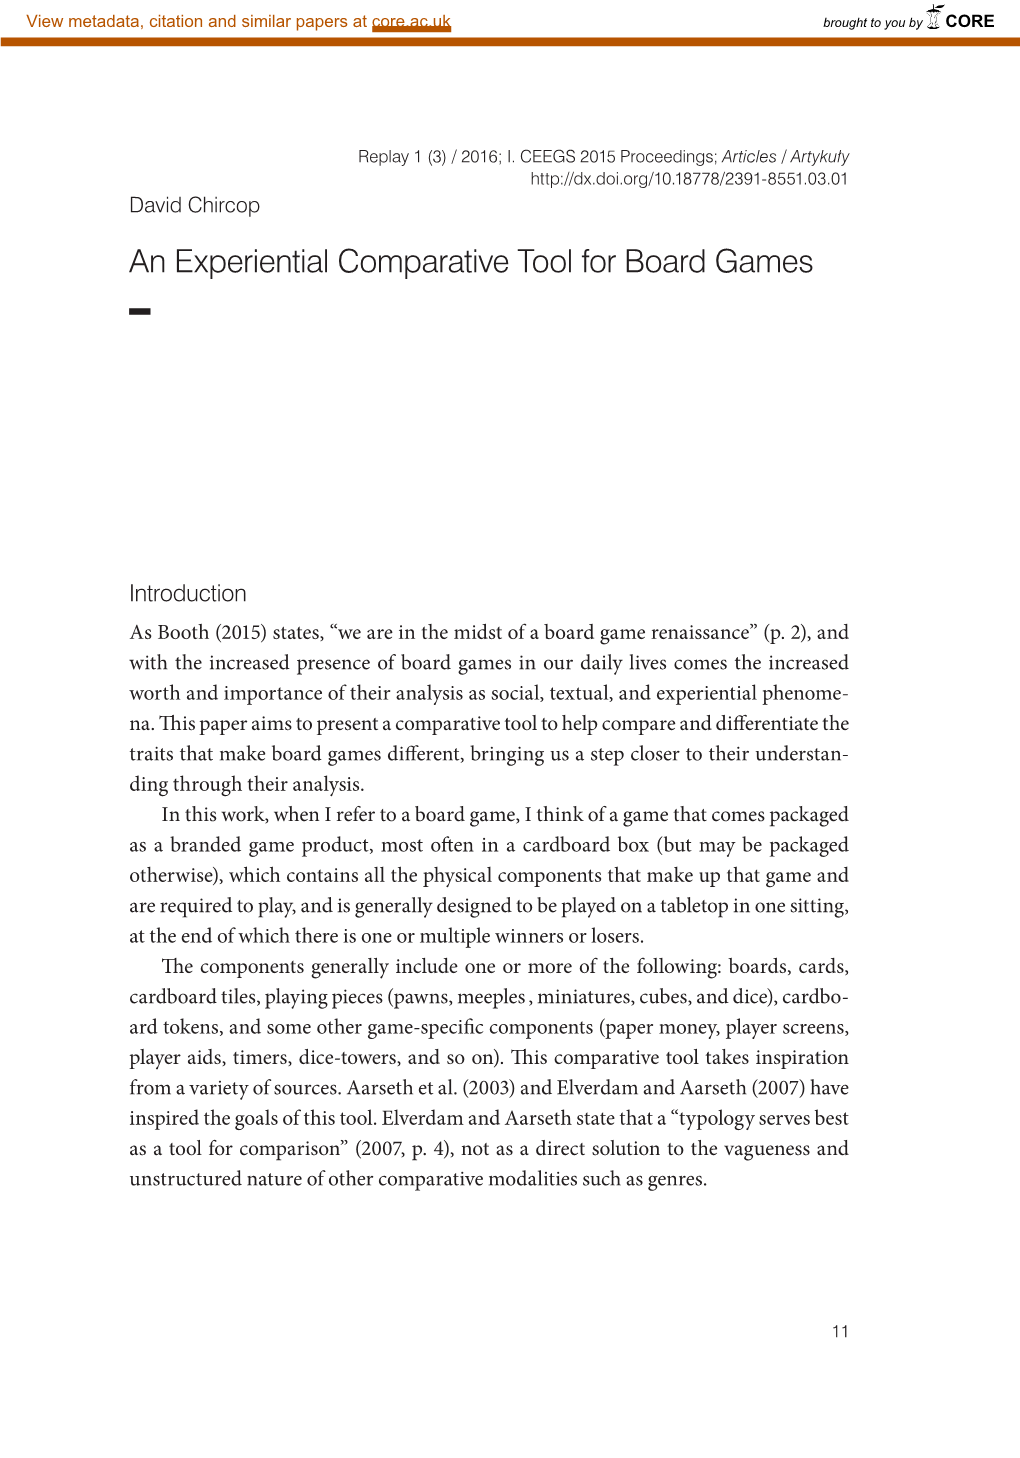 An Experiential Comparative Tool for Board Games